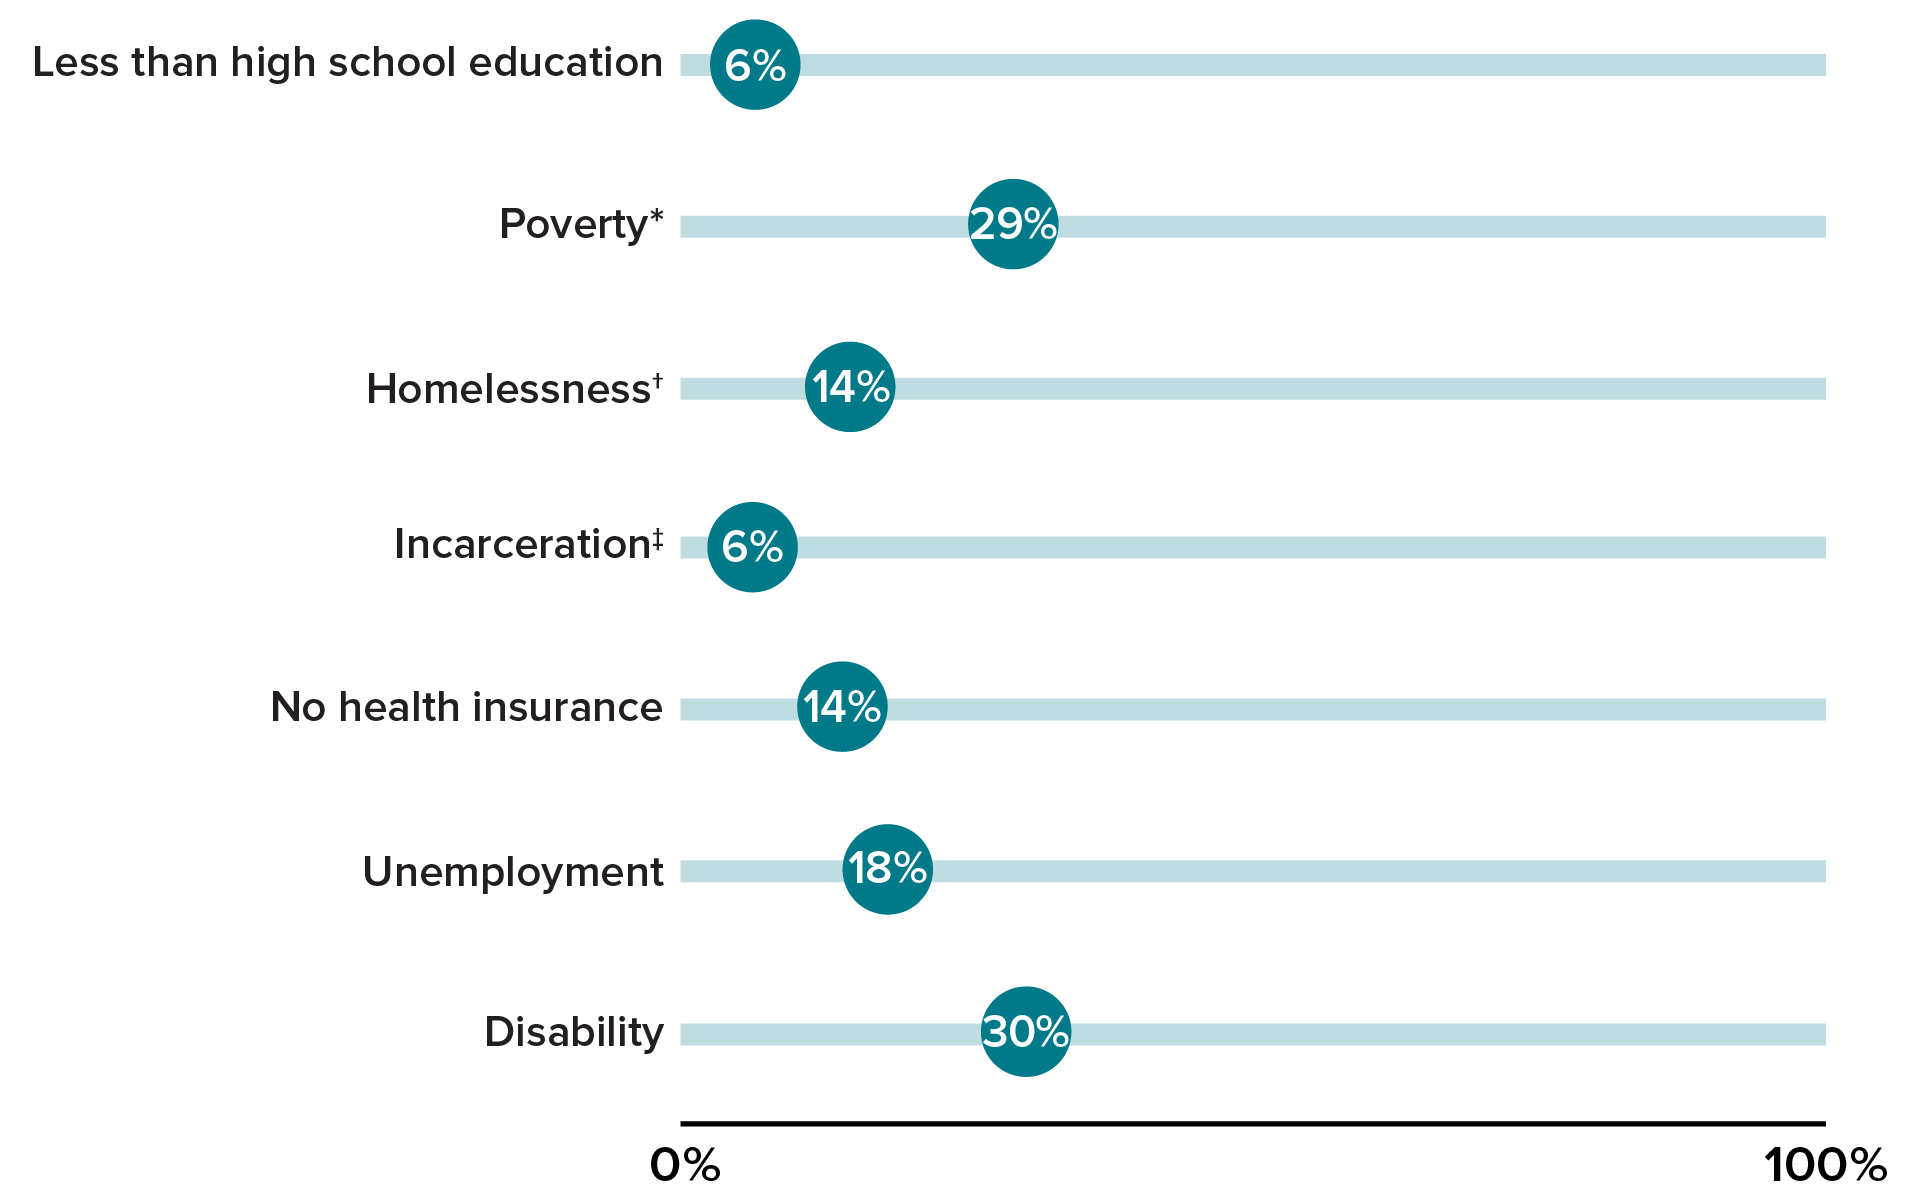 Chart showing social determinants of health among men who have sex with men: less than high school education (6%), poverty (29%), homelessness (14%), incarceration (6%), health insurance (14%), unemployment (18%), and disability (30%).